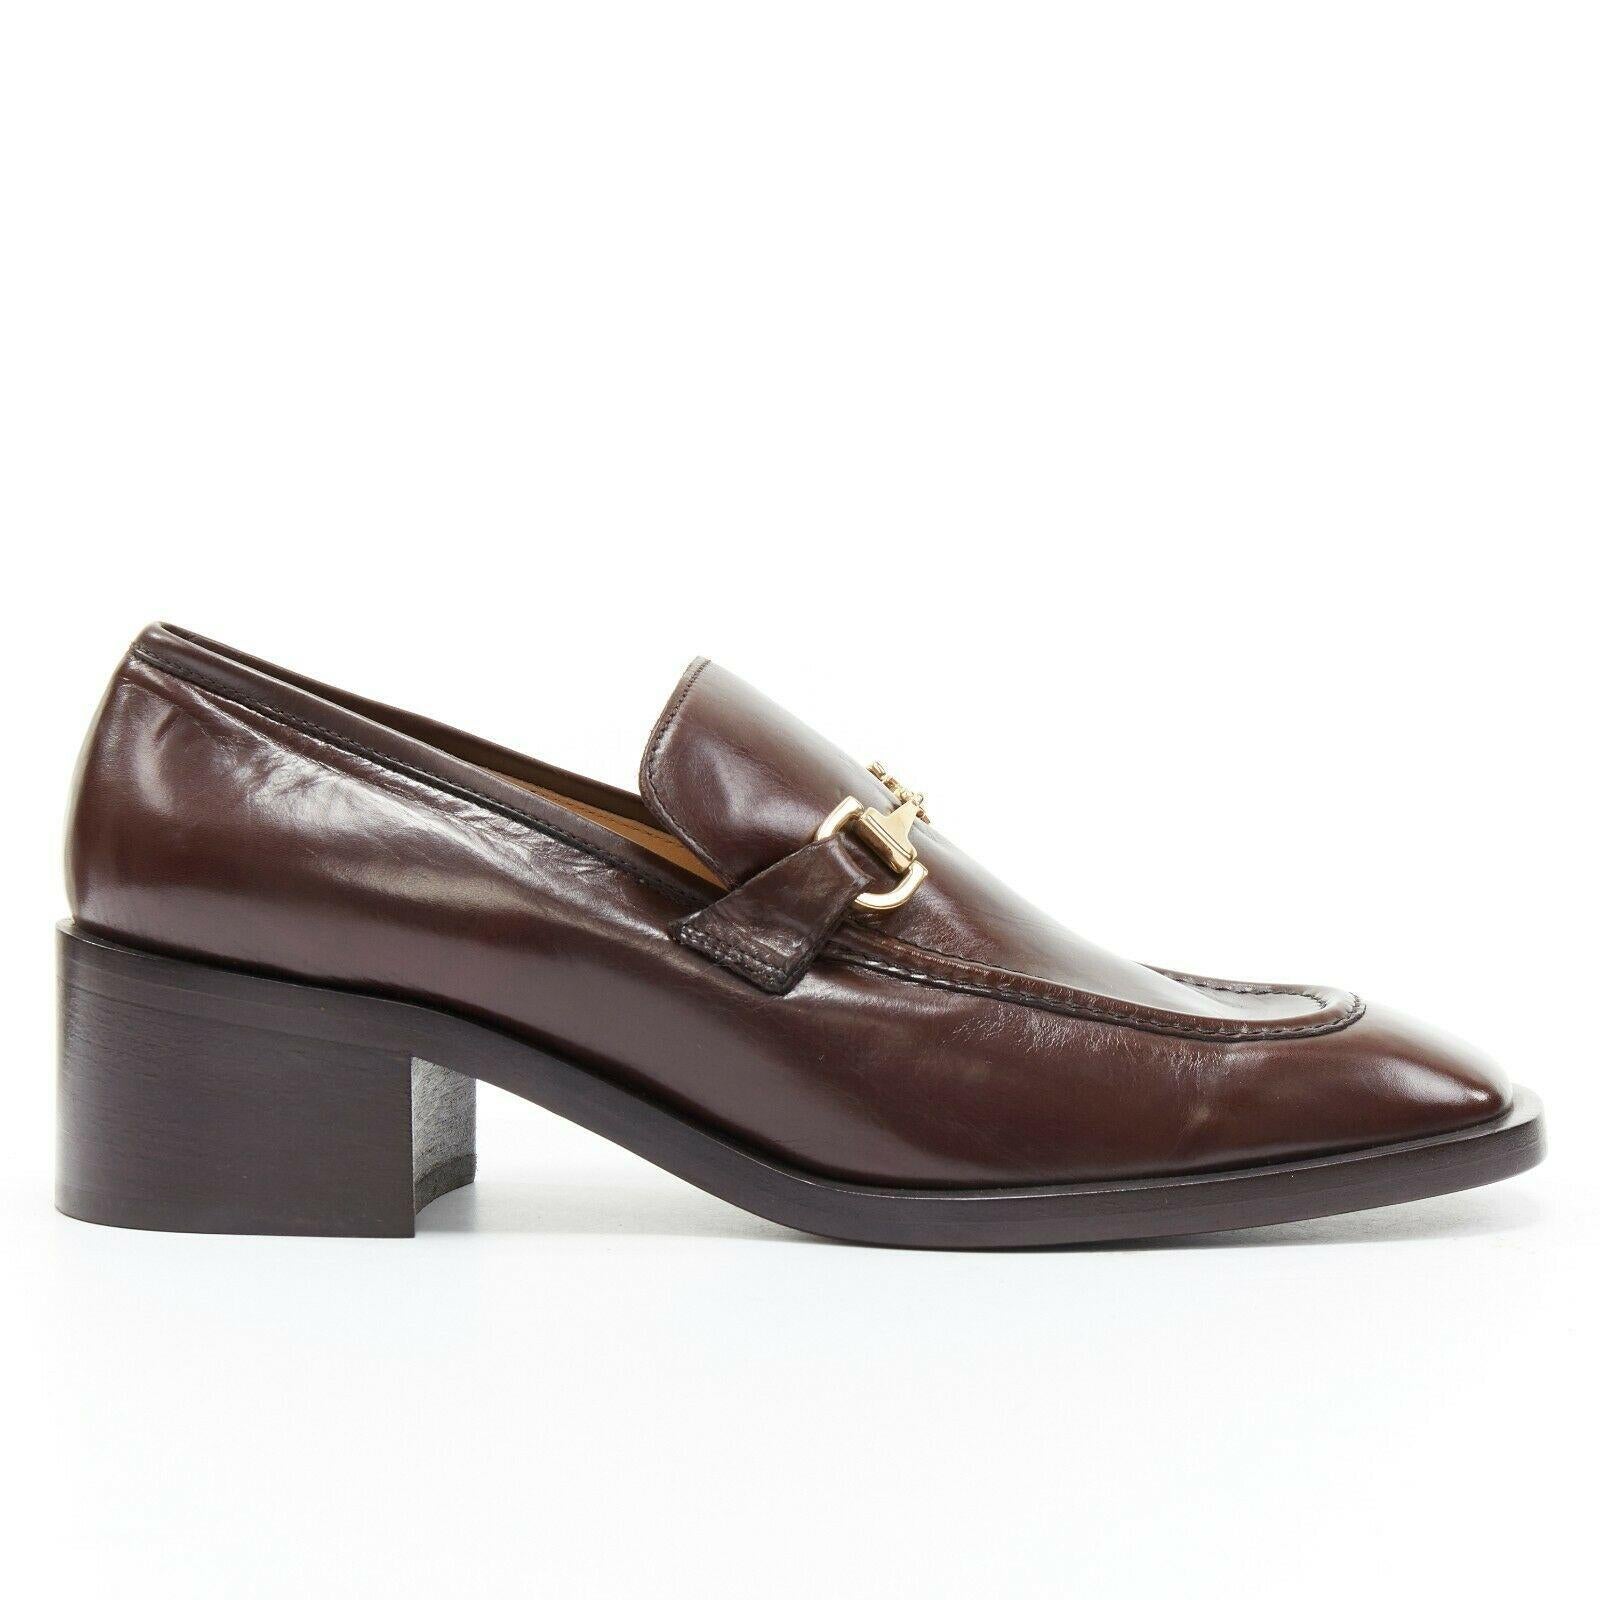 new GUCCI Vintage brown leather gold horsebit buckle square toe loafer EU36.5C

GUCCI VINTAGE
Dark brown polished leather. Gold-tone horse-bit metal buckle detail at front. Tonal stitching. Square toe. Stacked wood block heel. Slip on loafer. Made